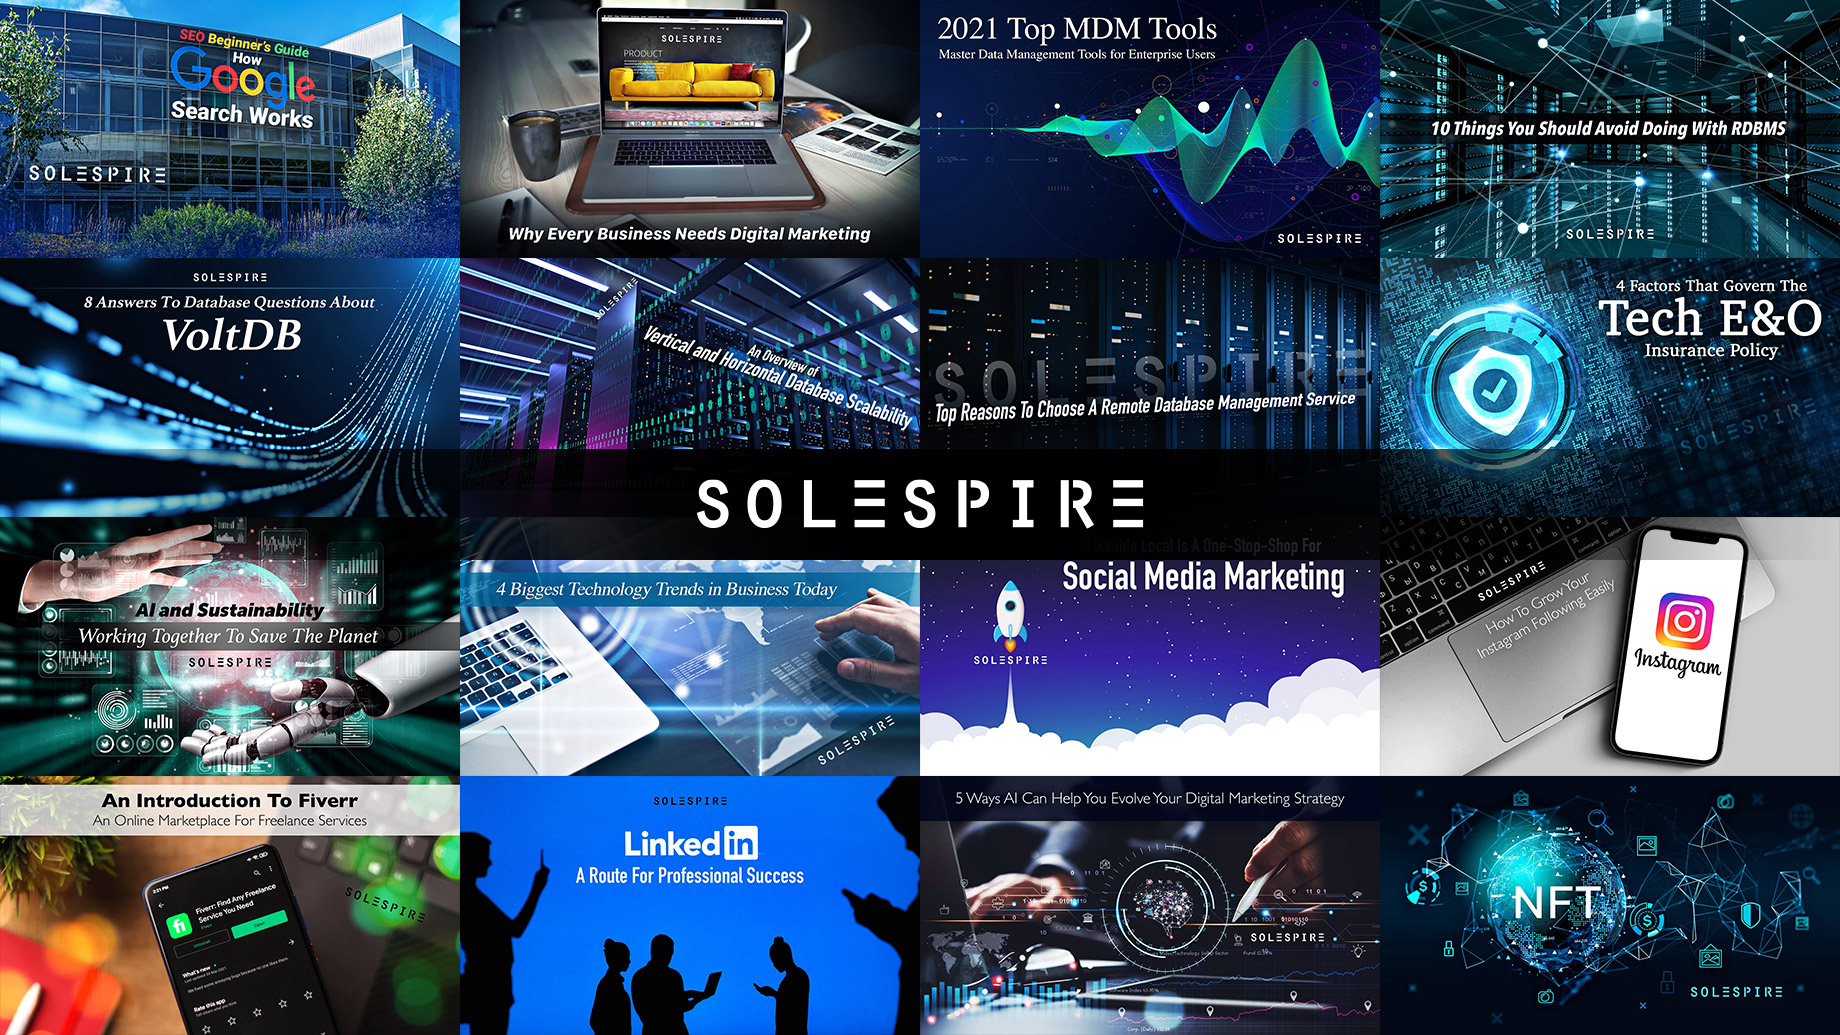 Introducing Solespire Articles - Digital Media, Technology, Business, and More